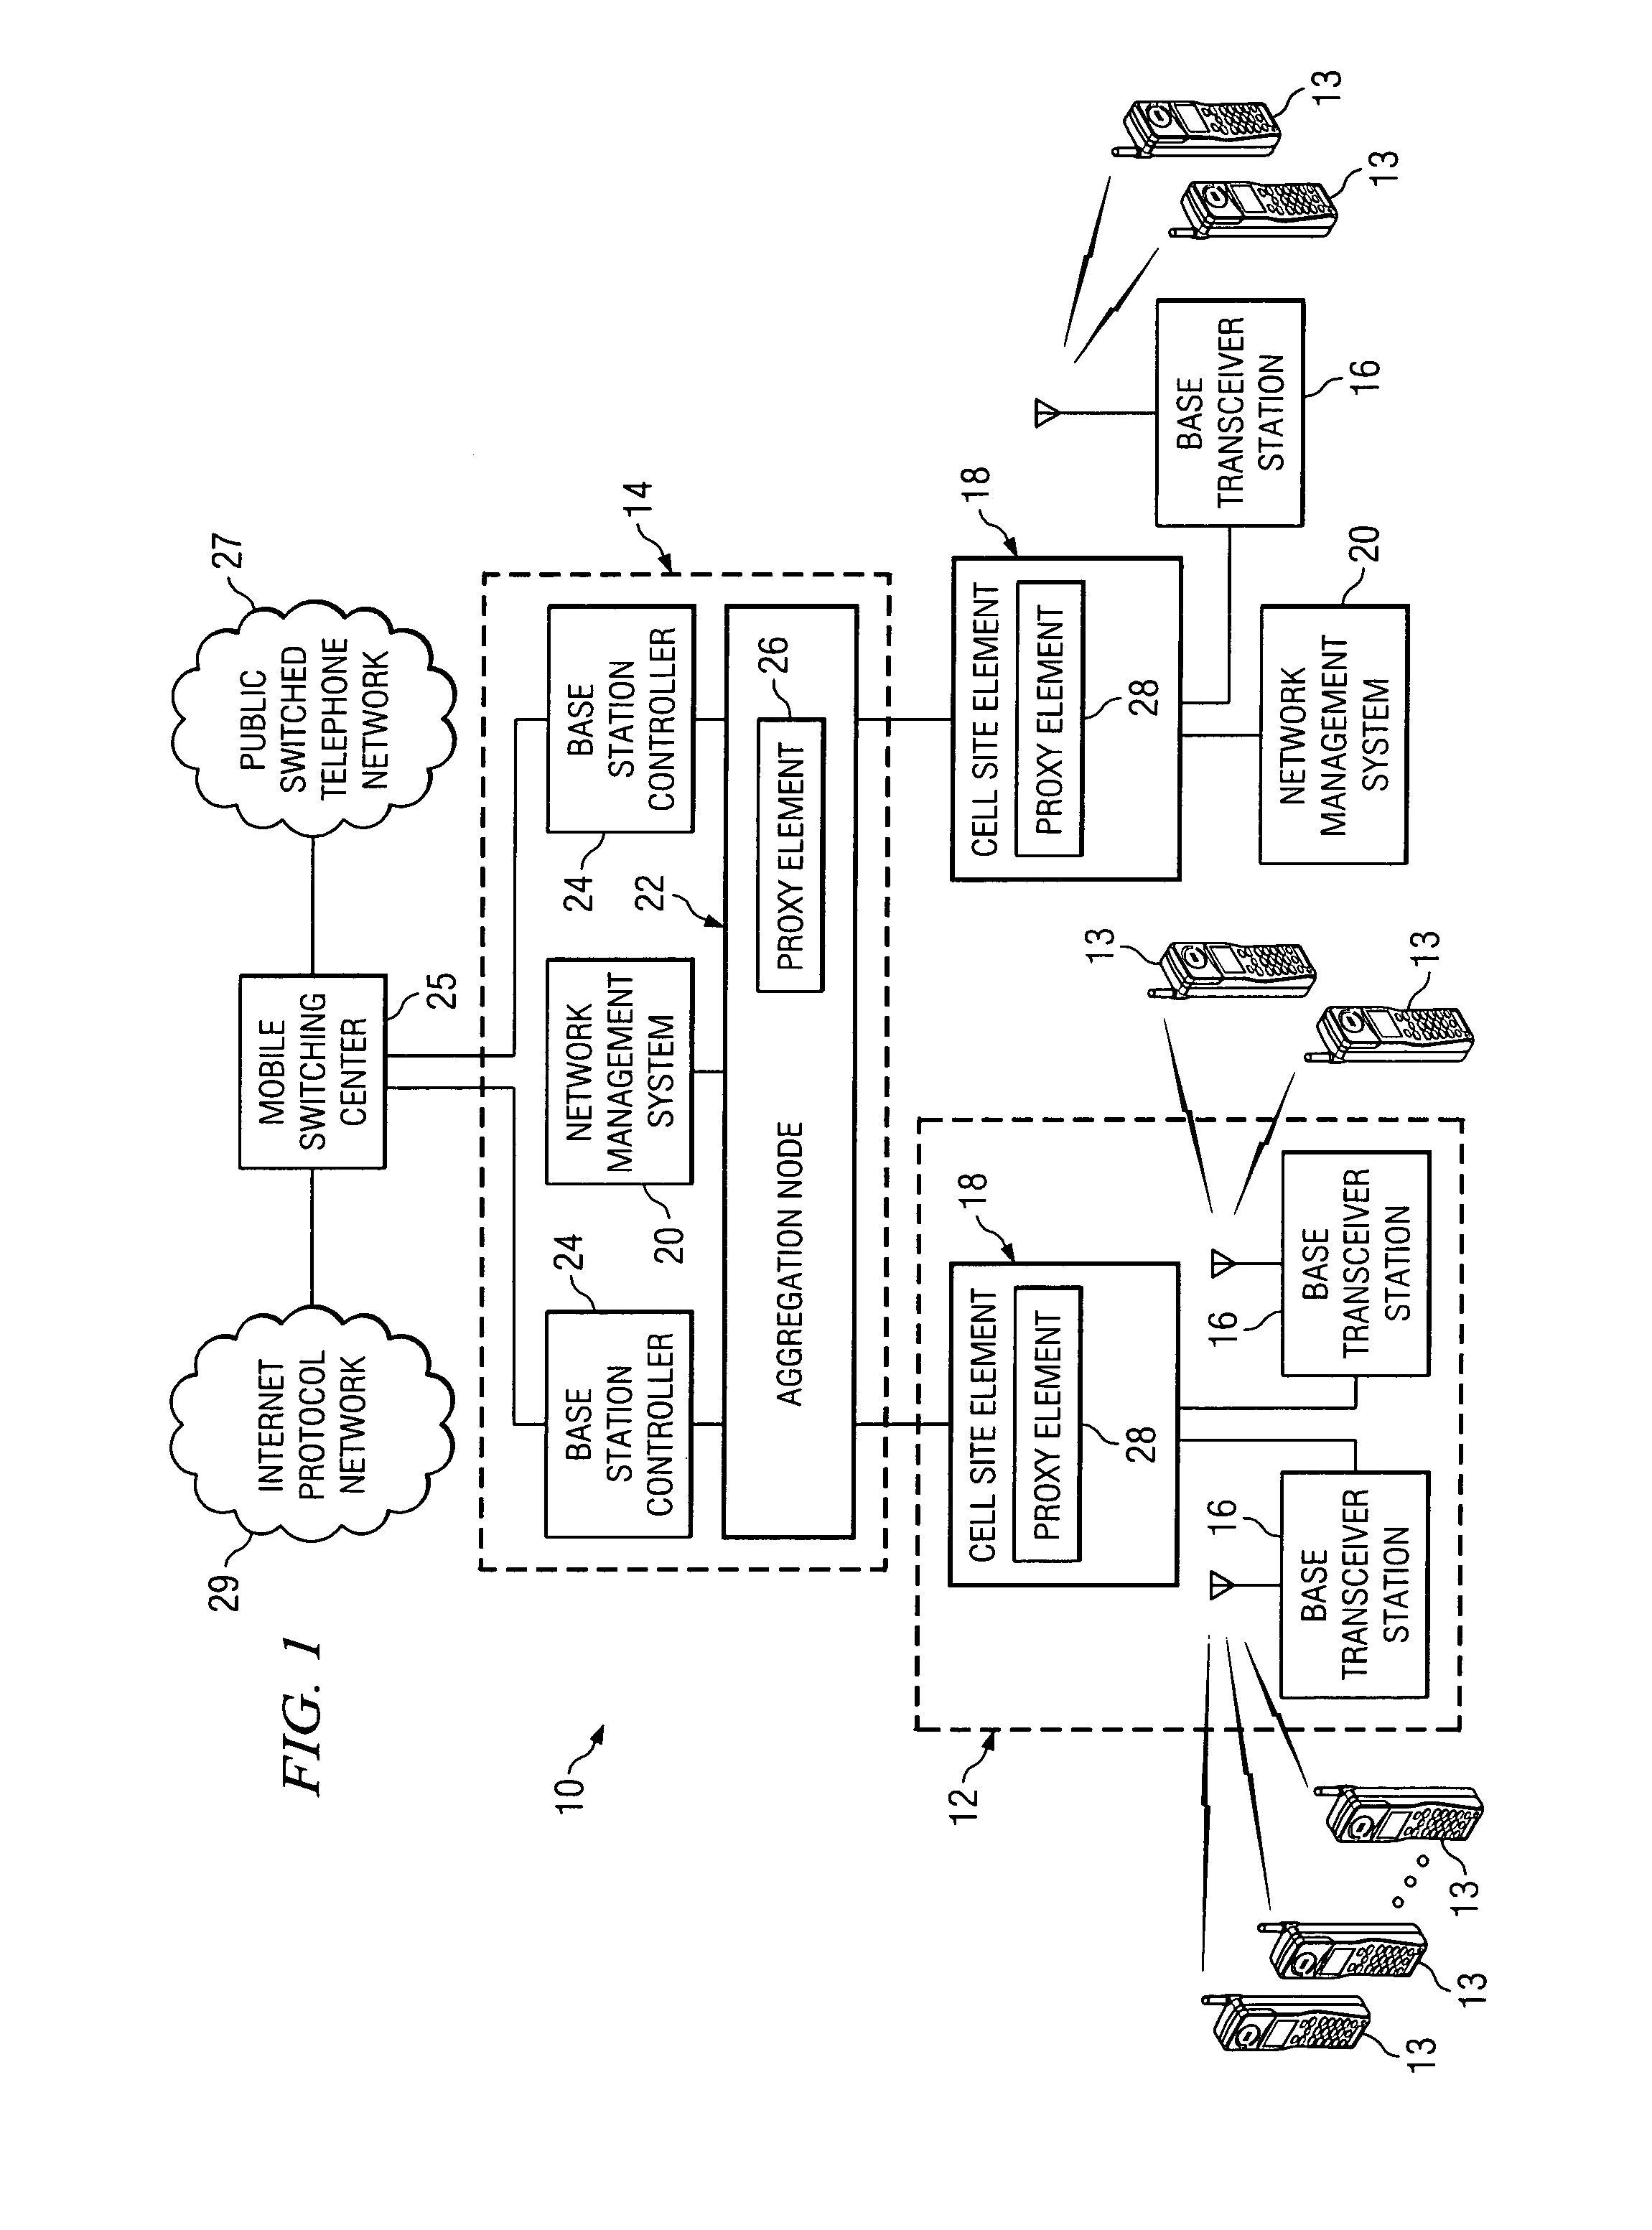 System and method for compressing information flows in a network environment